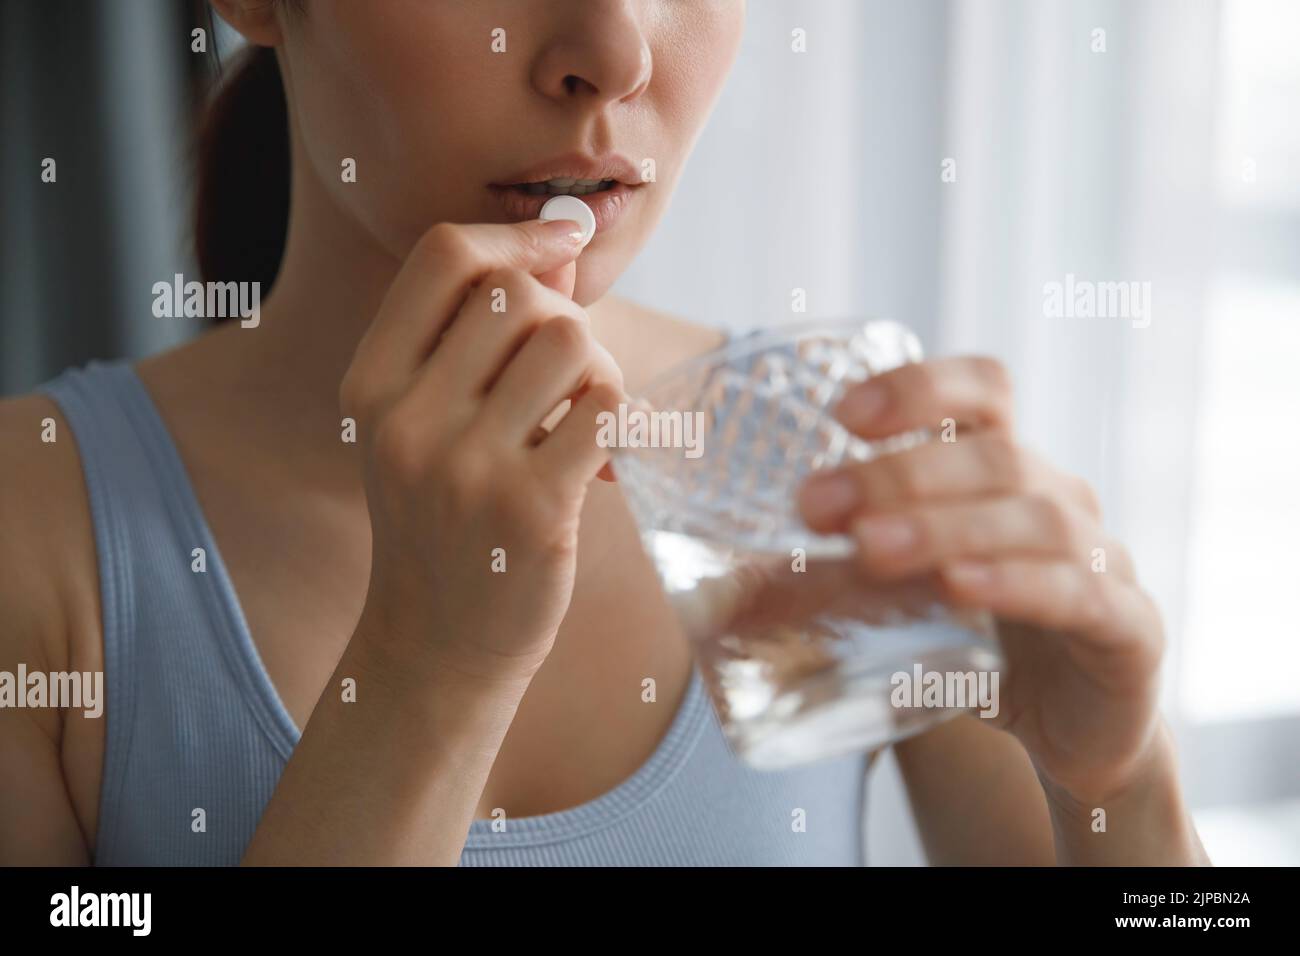 A young woman takes medications or vitamins. She's holding a glass of water. Stock Photo